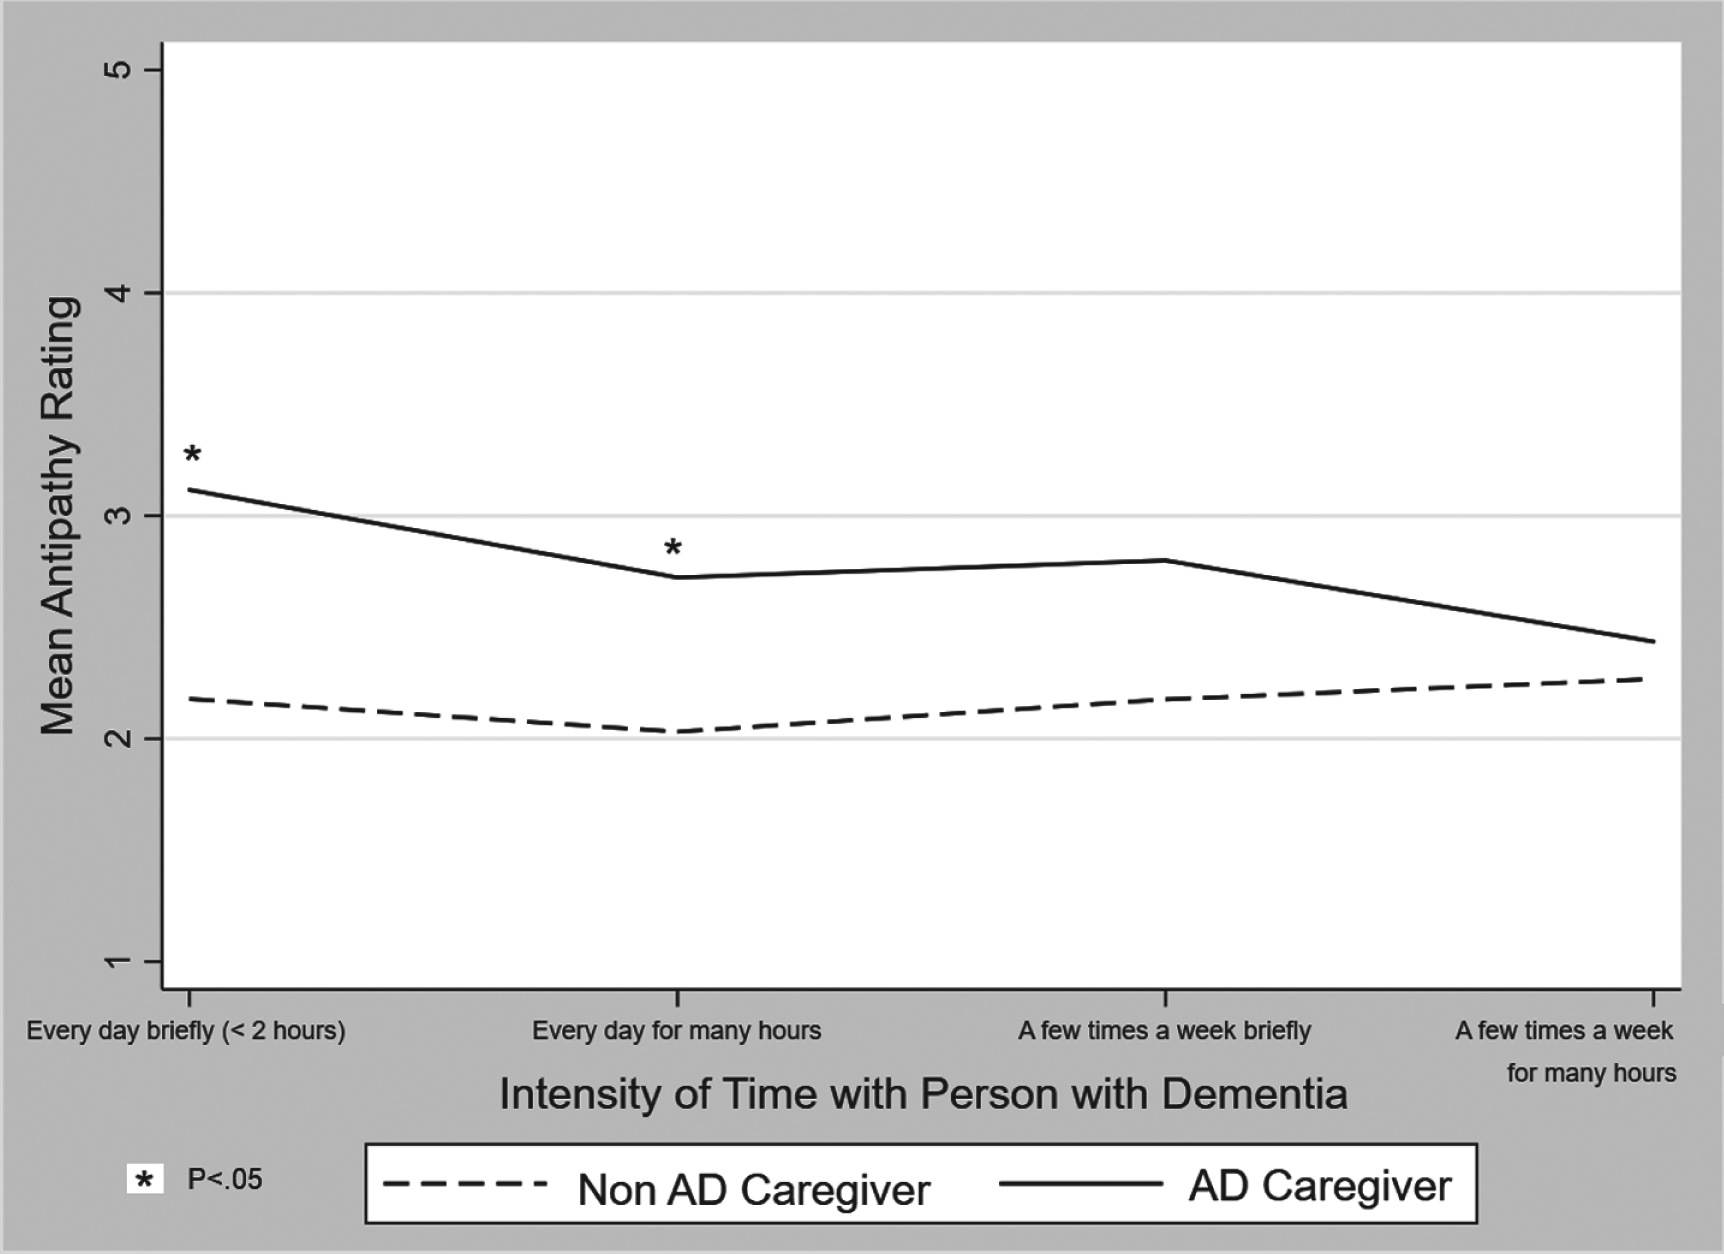 Mean score on Family Stigma of Alzheimer’s Disease (FS-ADS) Antipathy Scale by Alzheimer’s disease (AD) caregiver status in subsample of respondents who reported at least weekly contact with a friend or family member with Alzheimer’s disease (n = 273).